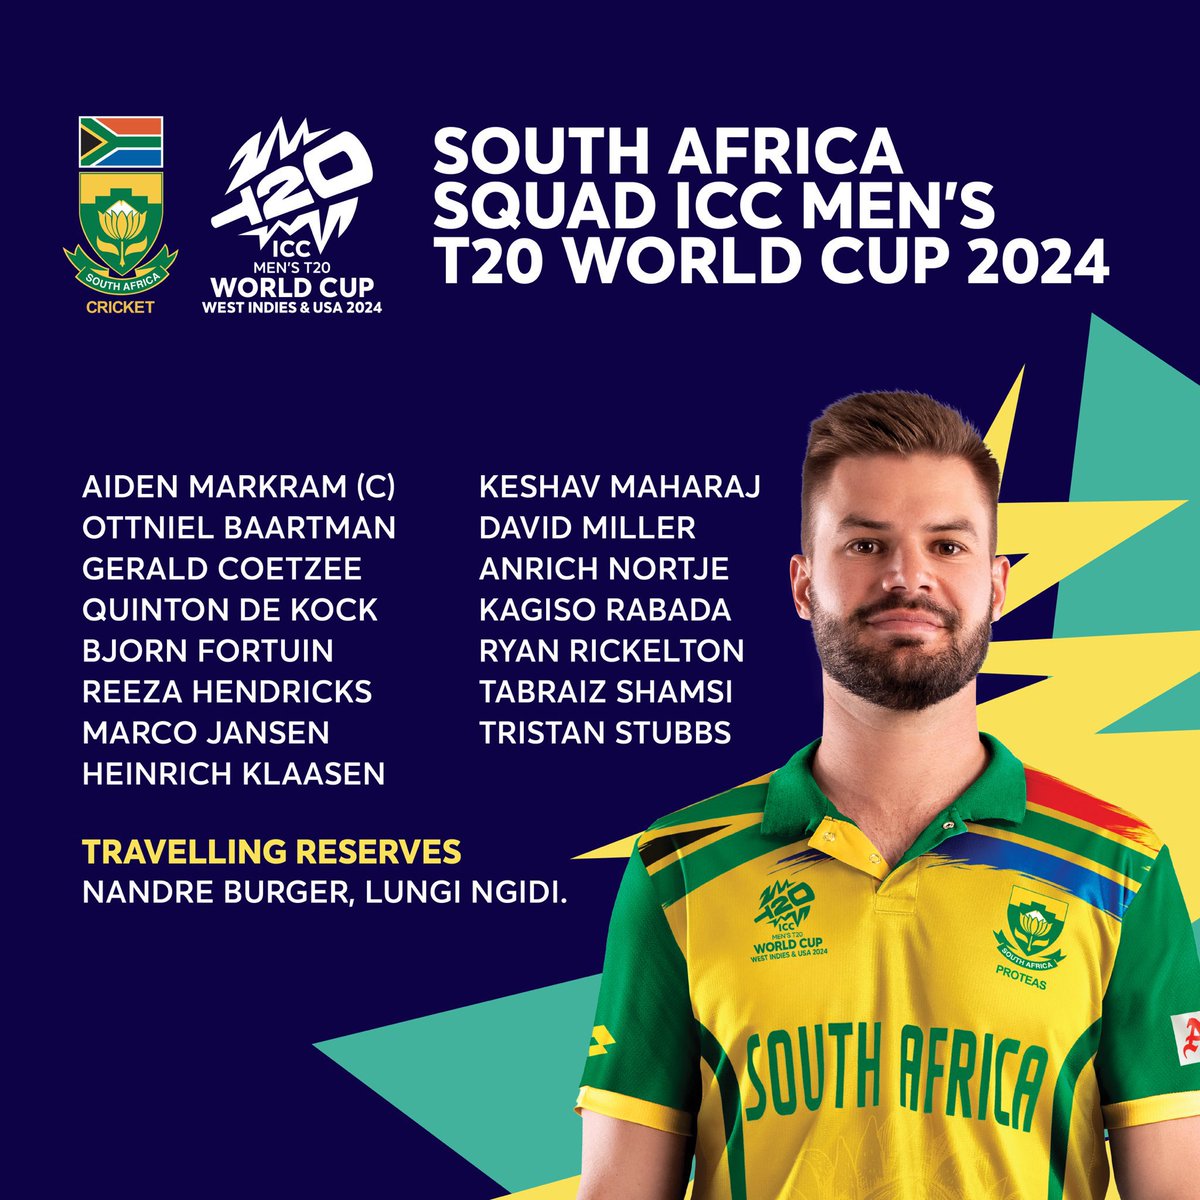 This is your T20 World Cup Proteas Men’s team South Africa! 🌟 Let's rally behind our squad as they aim to conquer the world stage and bring home the gold! 🏆💥 

Stay tuned for the out of this world performances! #T20WorldCup #OutOfThisWorld #BePartOfIt